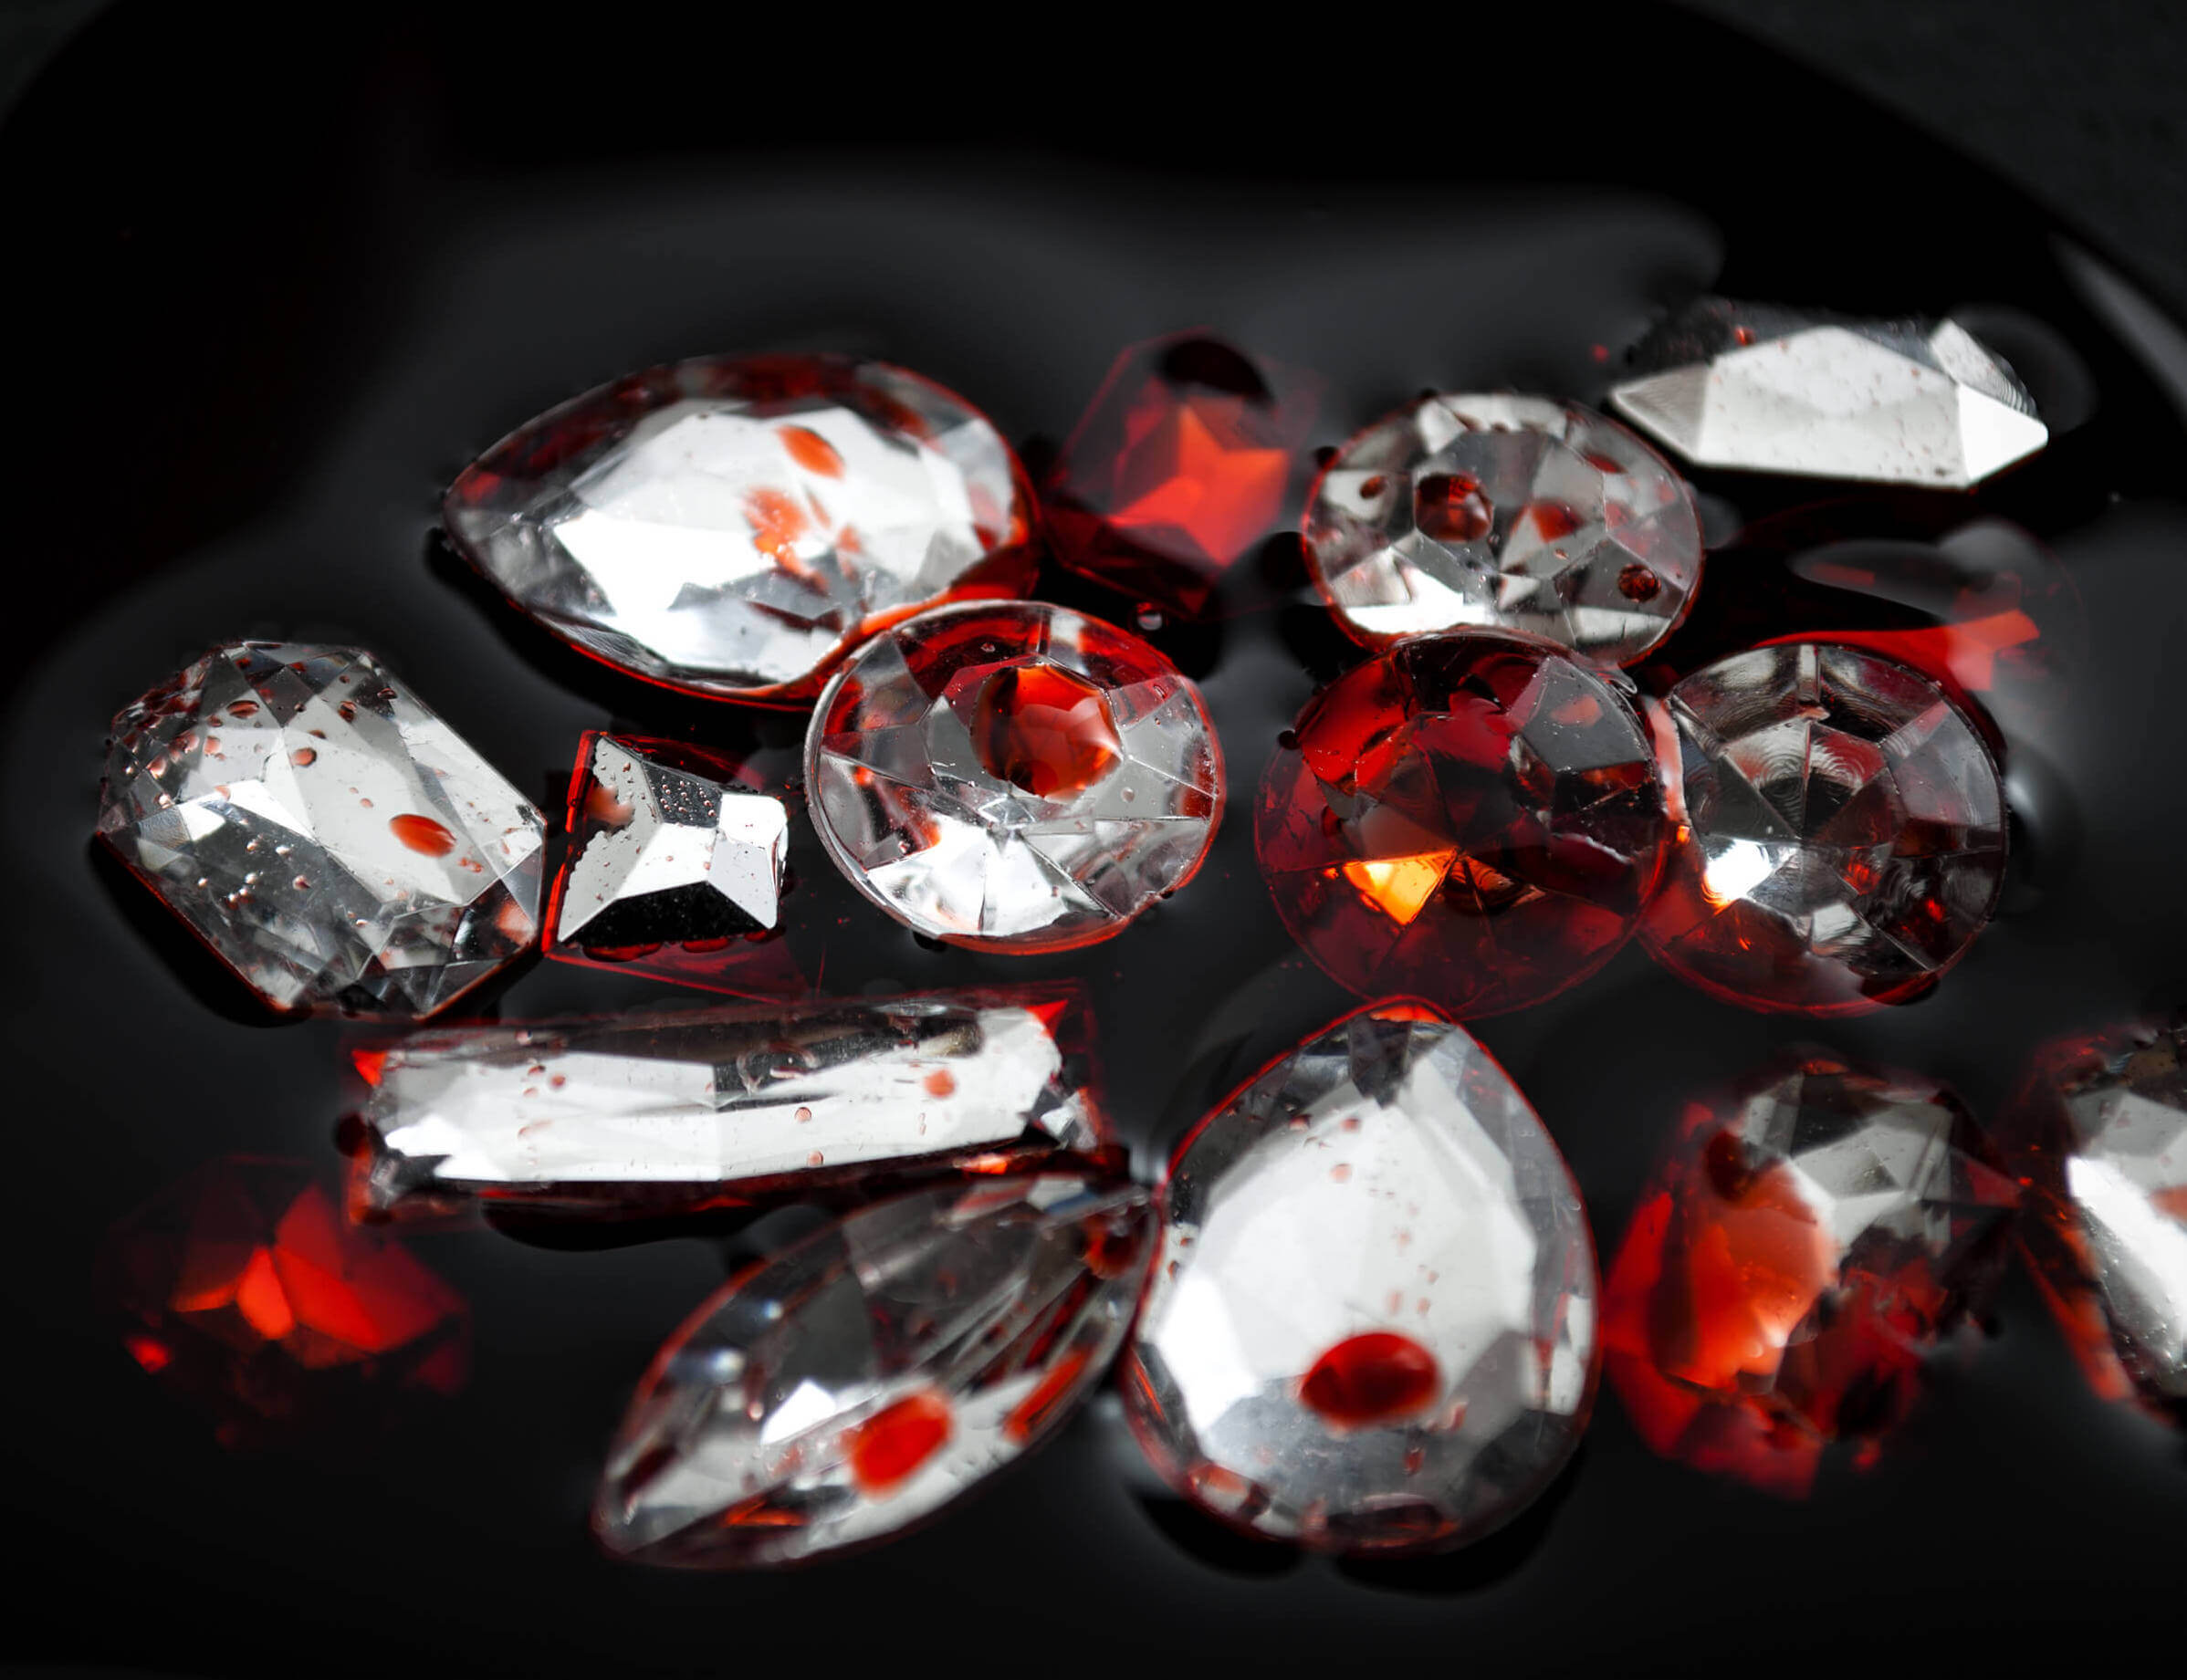 Diamonds covered in blood, with a black background.